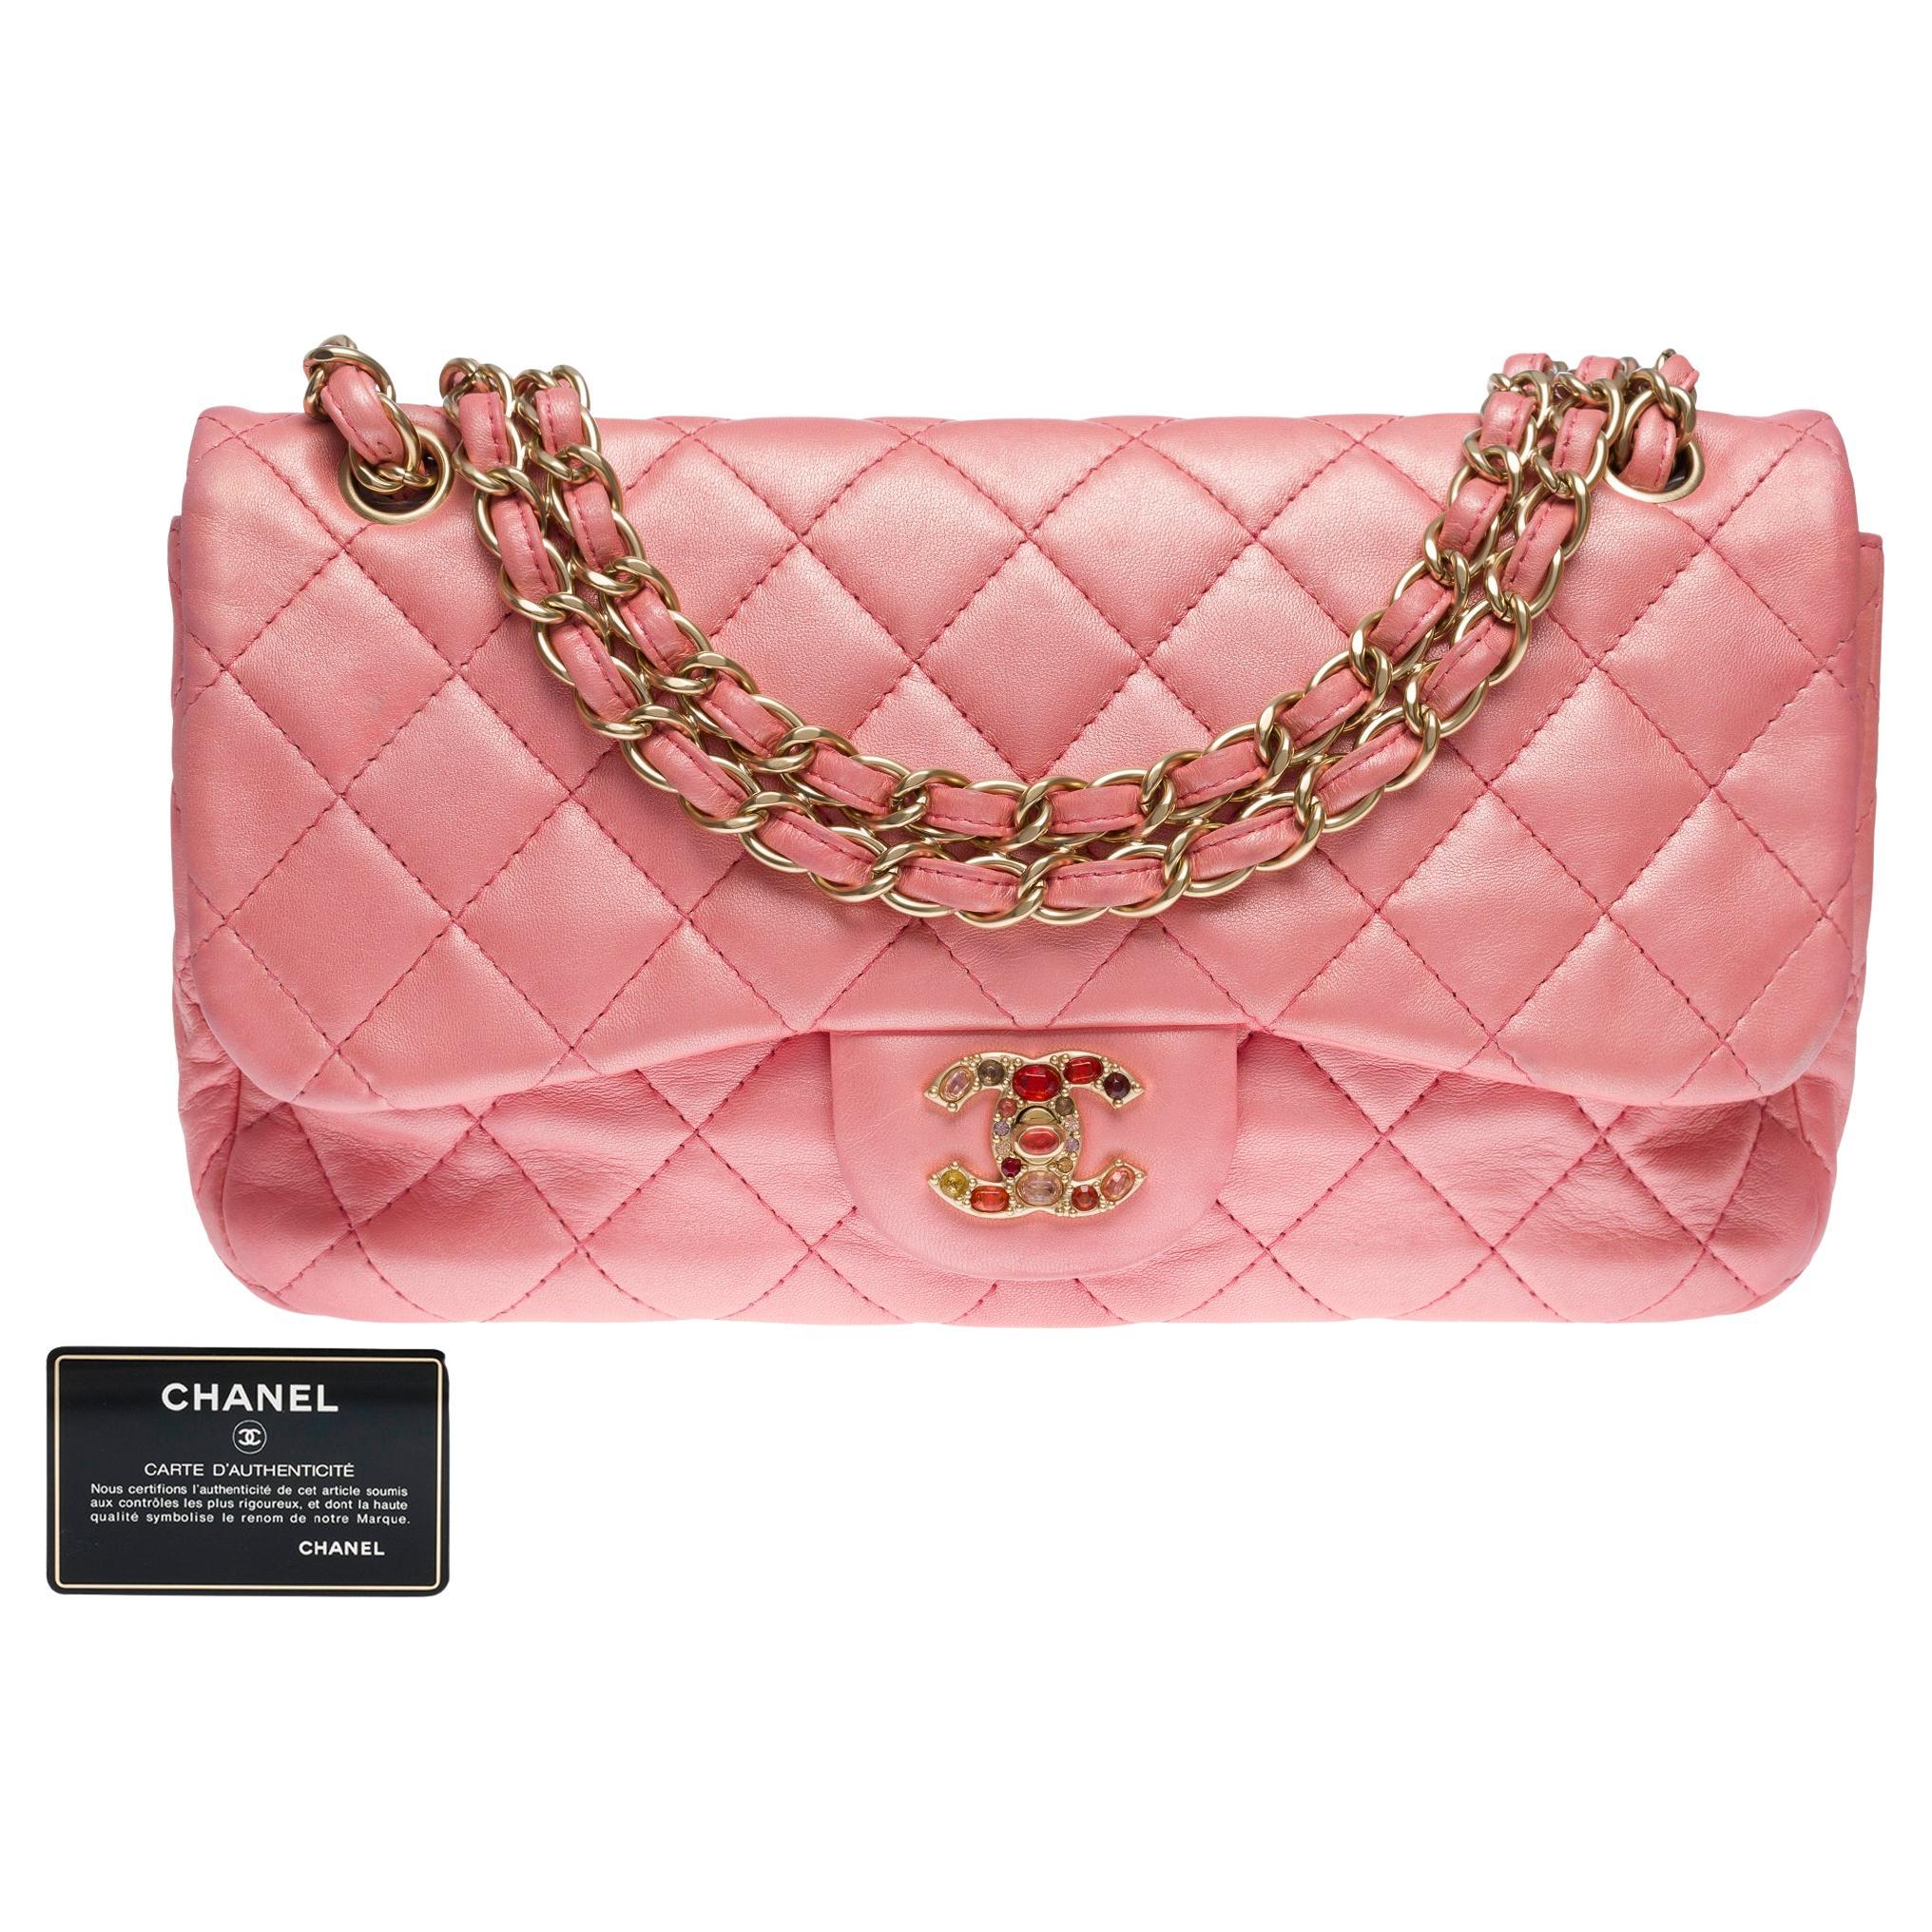 Chanel limited edition shoulder flap bag in Metallic Pink quilted